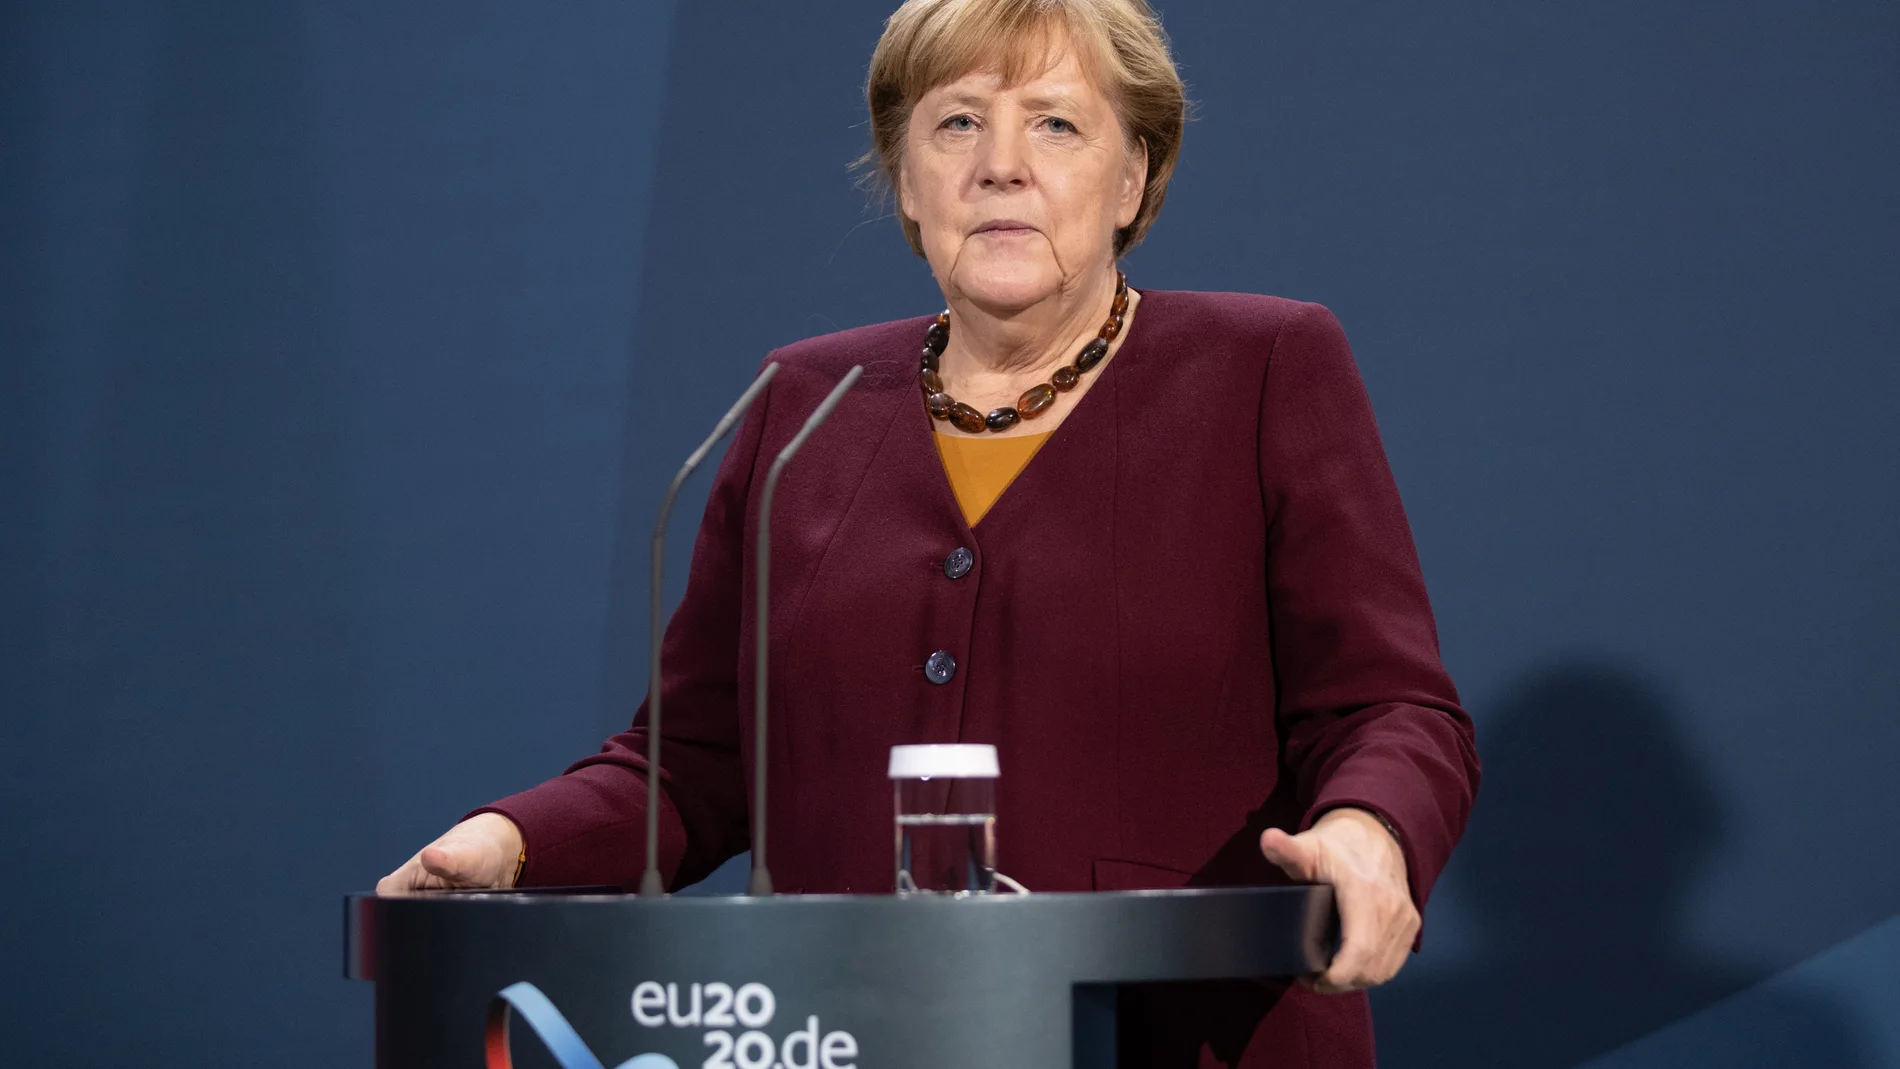 Berlin (Germany).- German Chancellor Angela Merkel gives a press statement after an EU Summit video conference, in Berlin, Germany, 19 November 2020. (Alemania) EFE/EPA/ANDREAS GORA / POOL